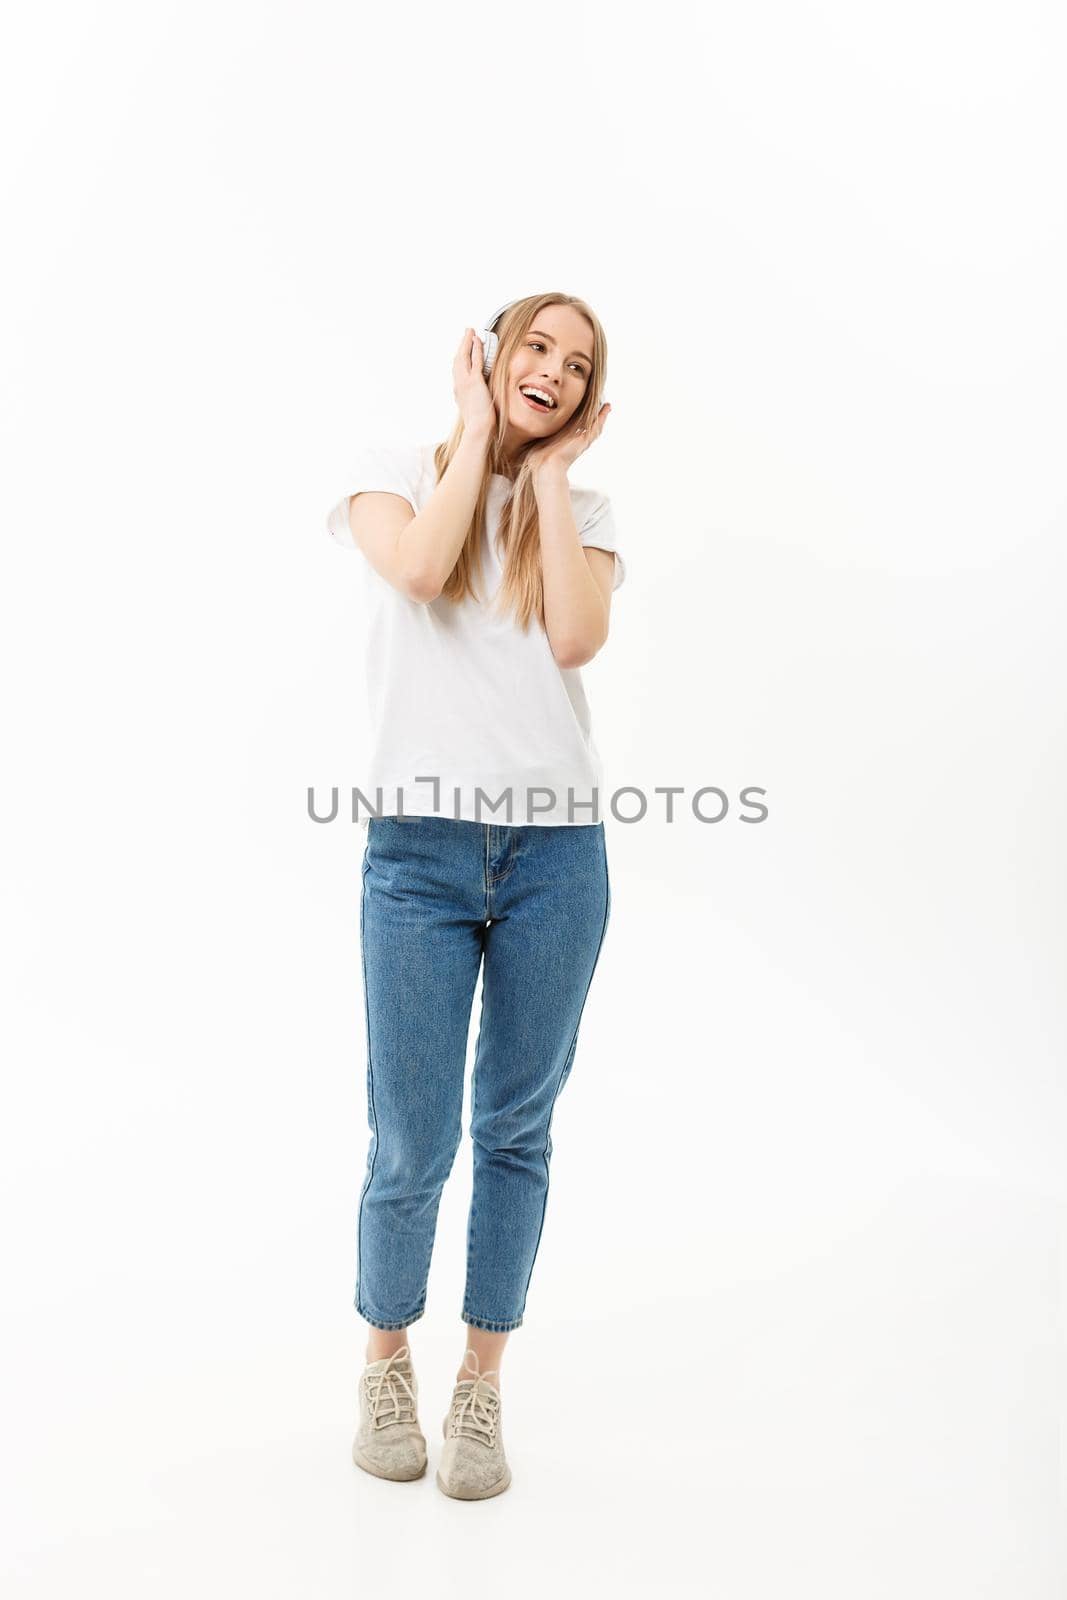 Lifestyle Concept: Portrait of a cheerful happy girl student listening to music with headphones while dancing isolated over white background.